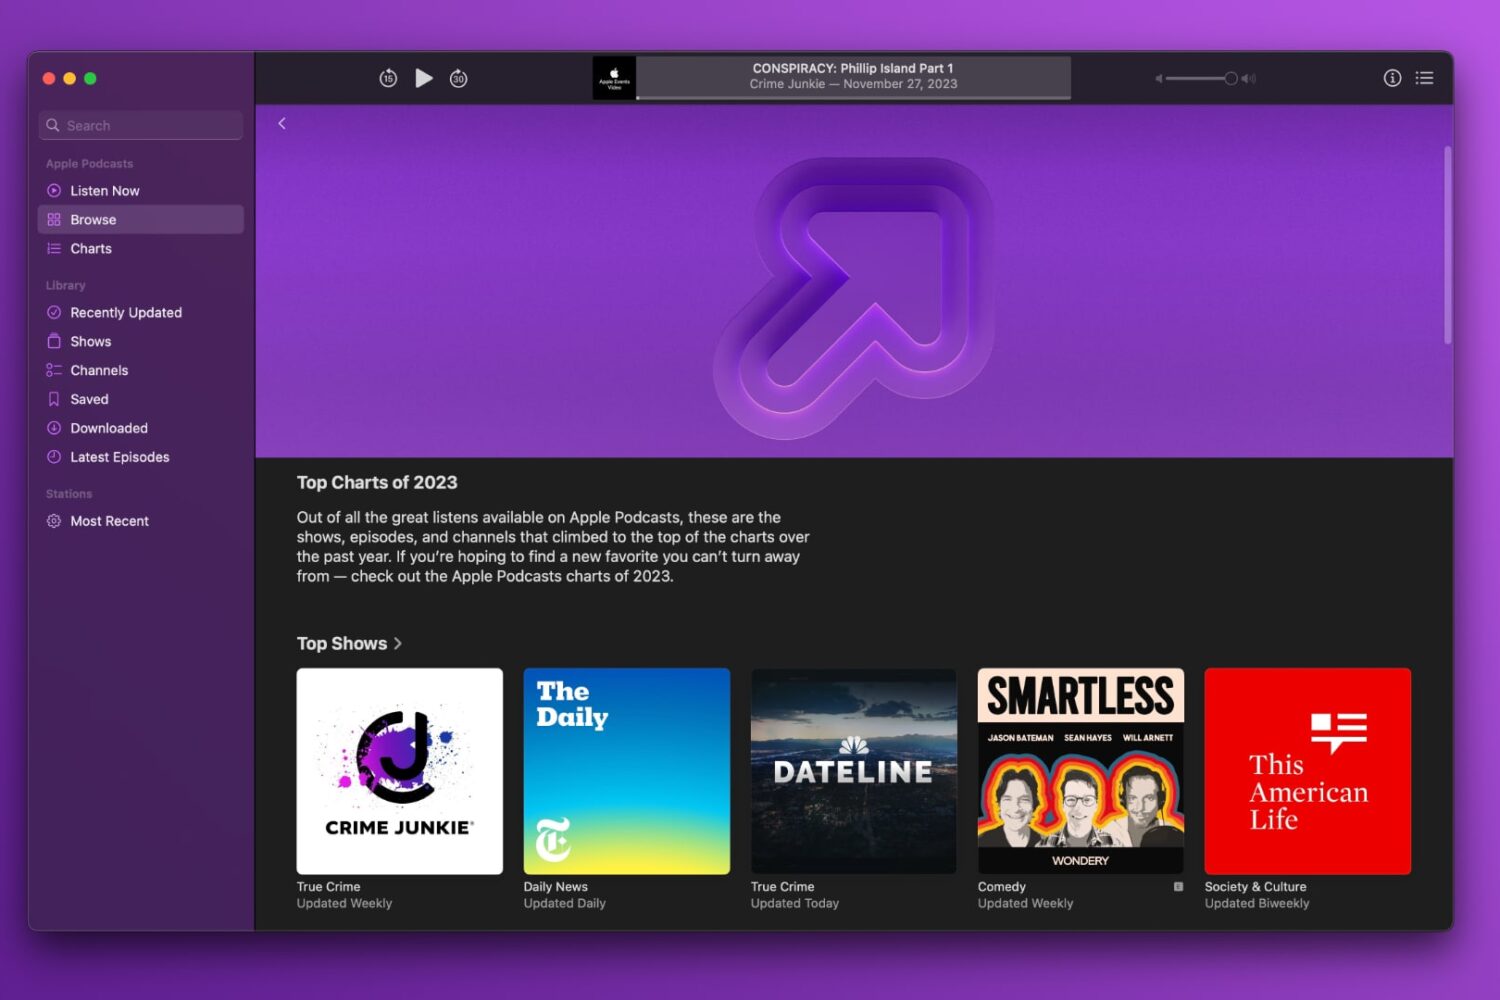 The Apple Podcasts Mac app showcasing the 2023 charts